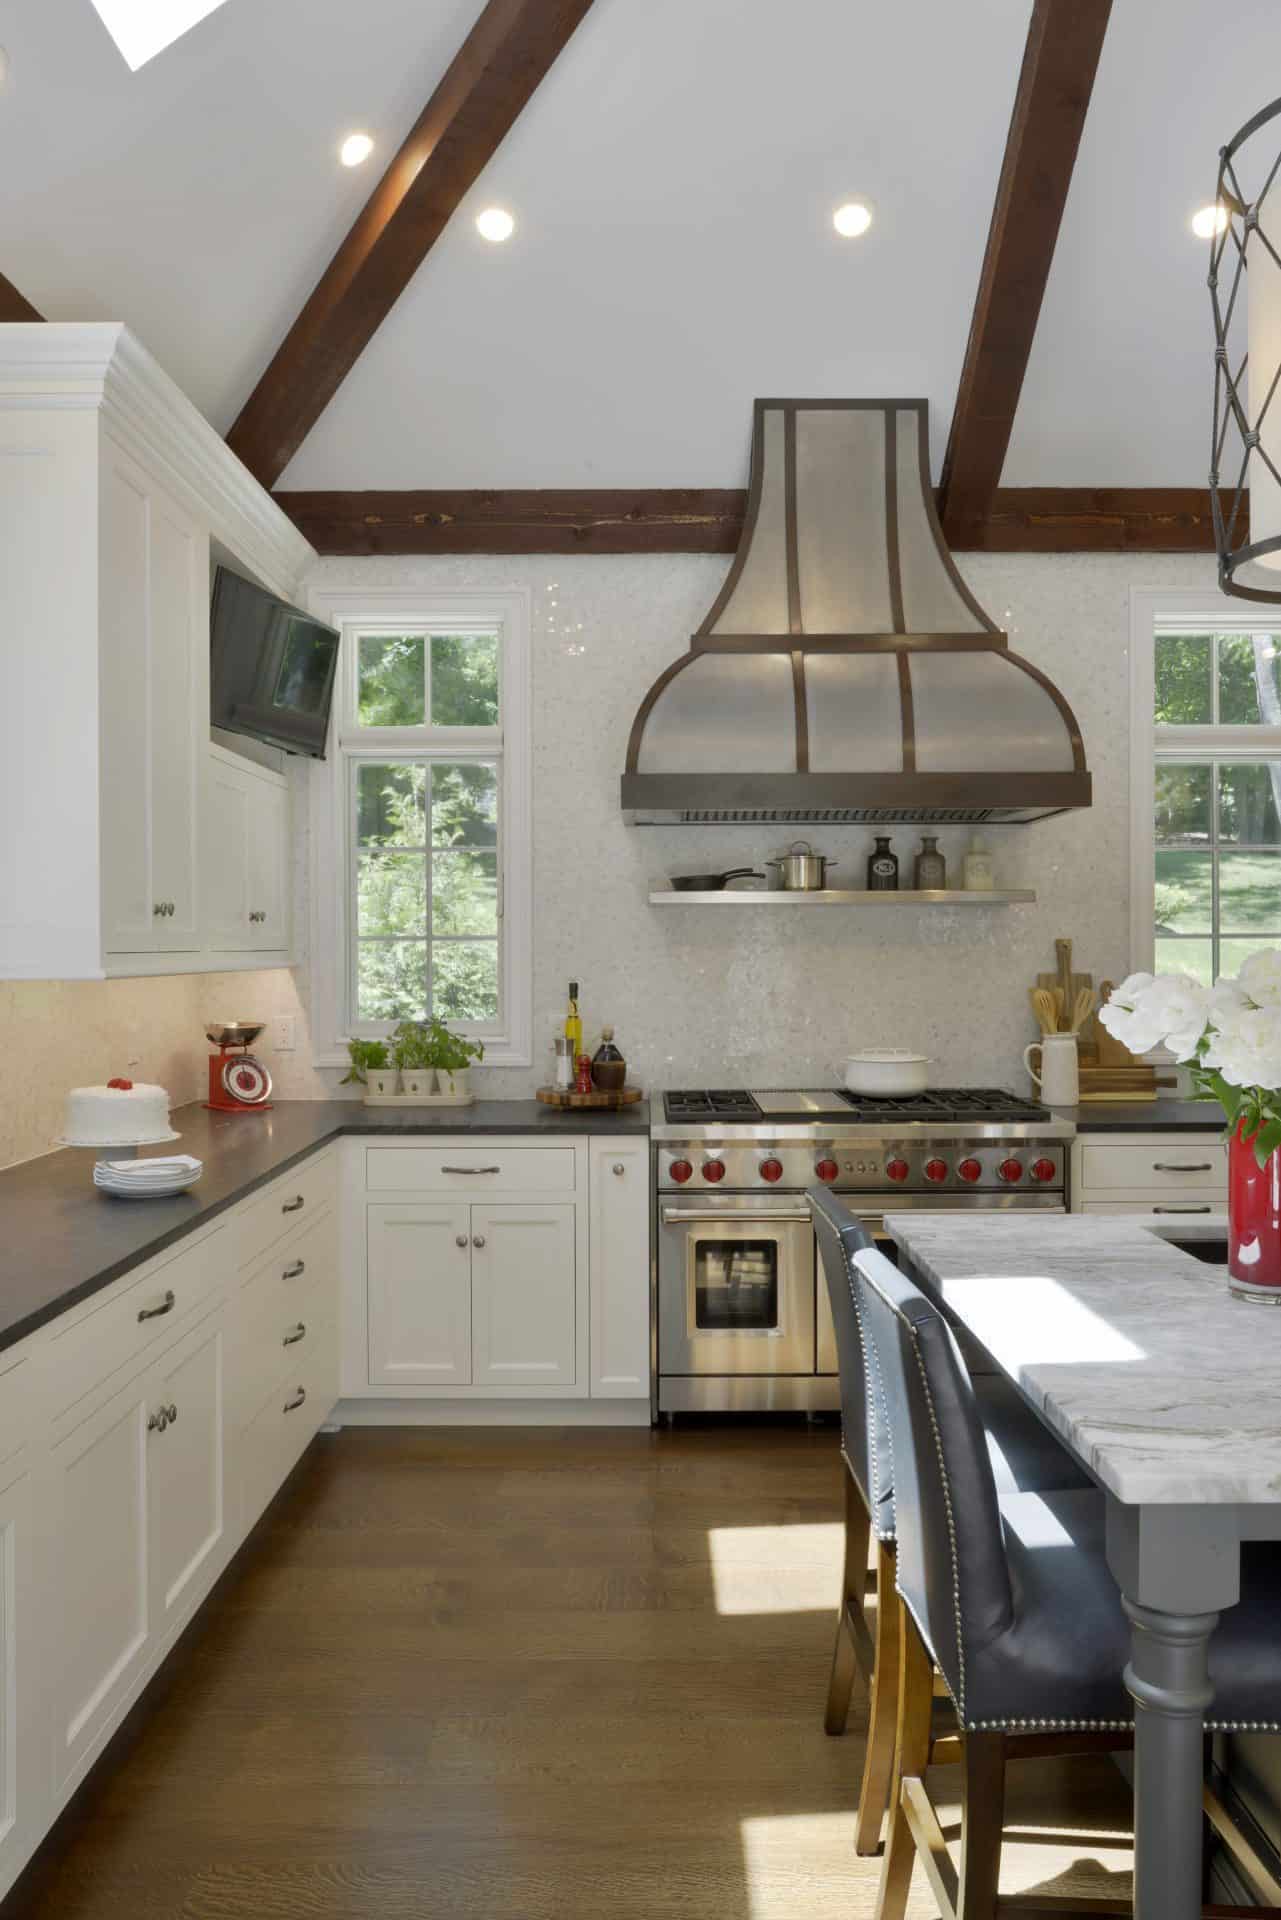 Custom somers NY kitchen features white painted Bilotta cabinets, gray quartz counters and custom range hood.